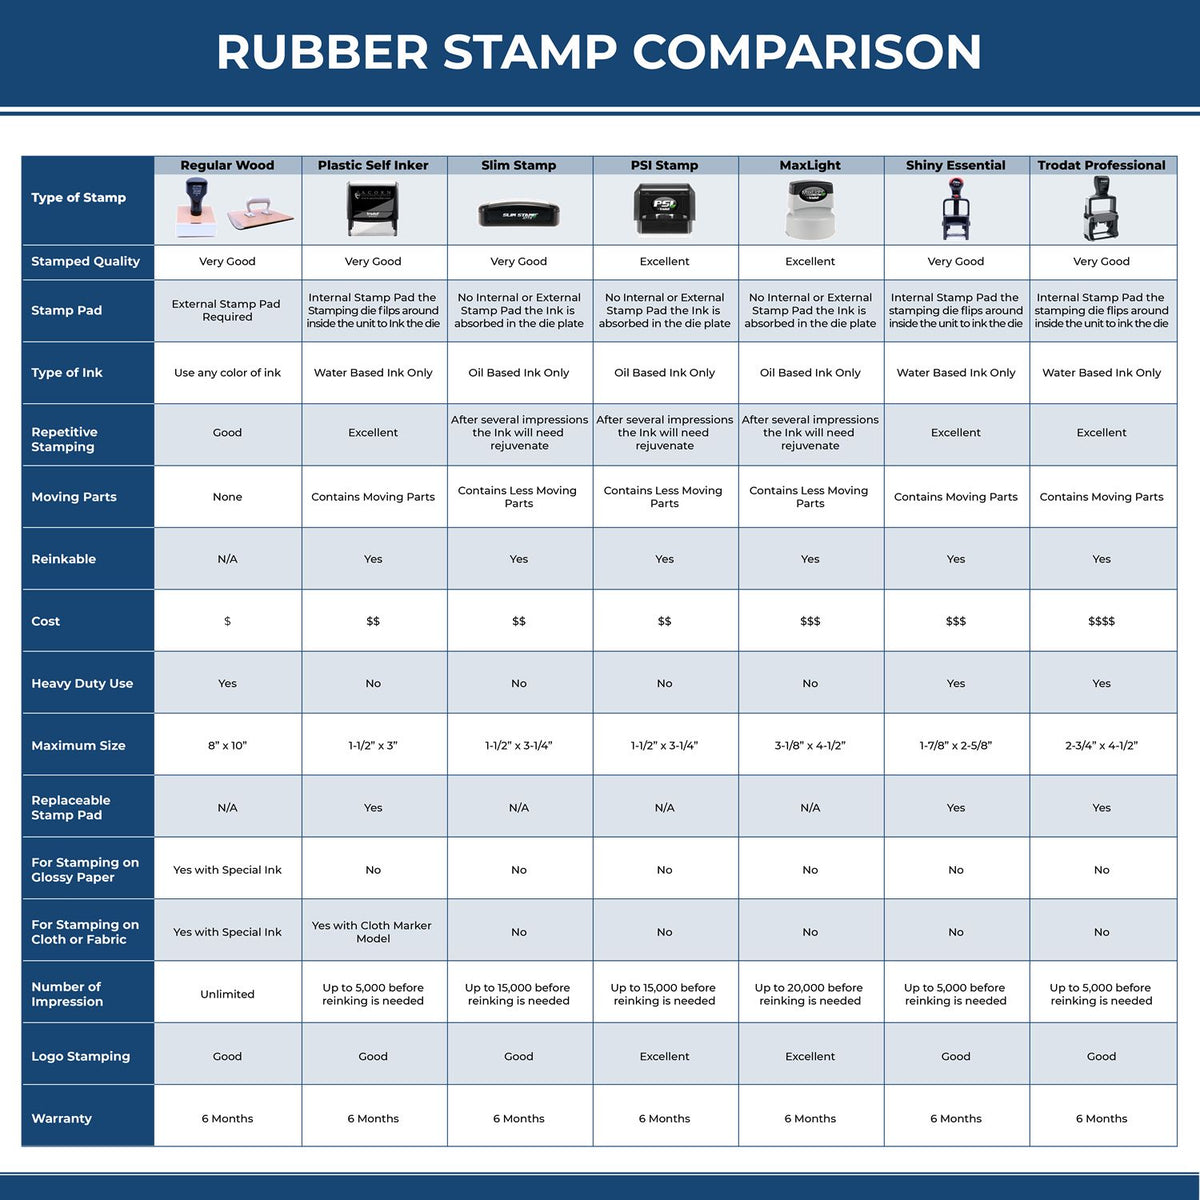 Self-Inking Global Express Guaranteed Stamp 4441S Rubber Stamp Comparison